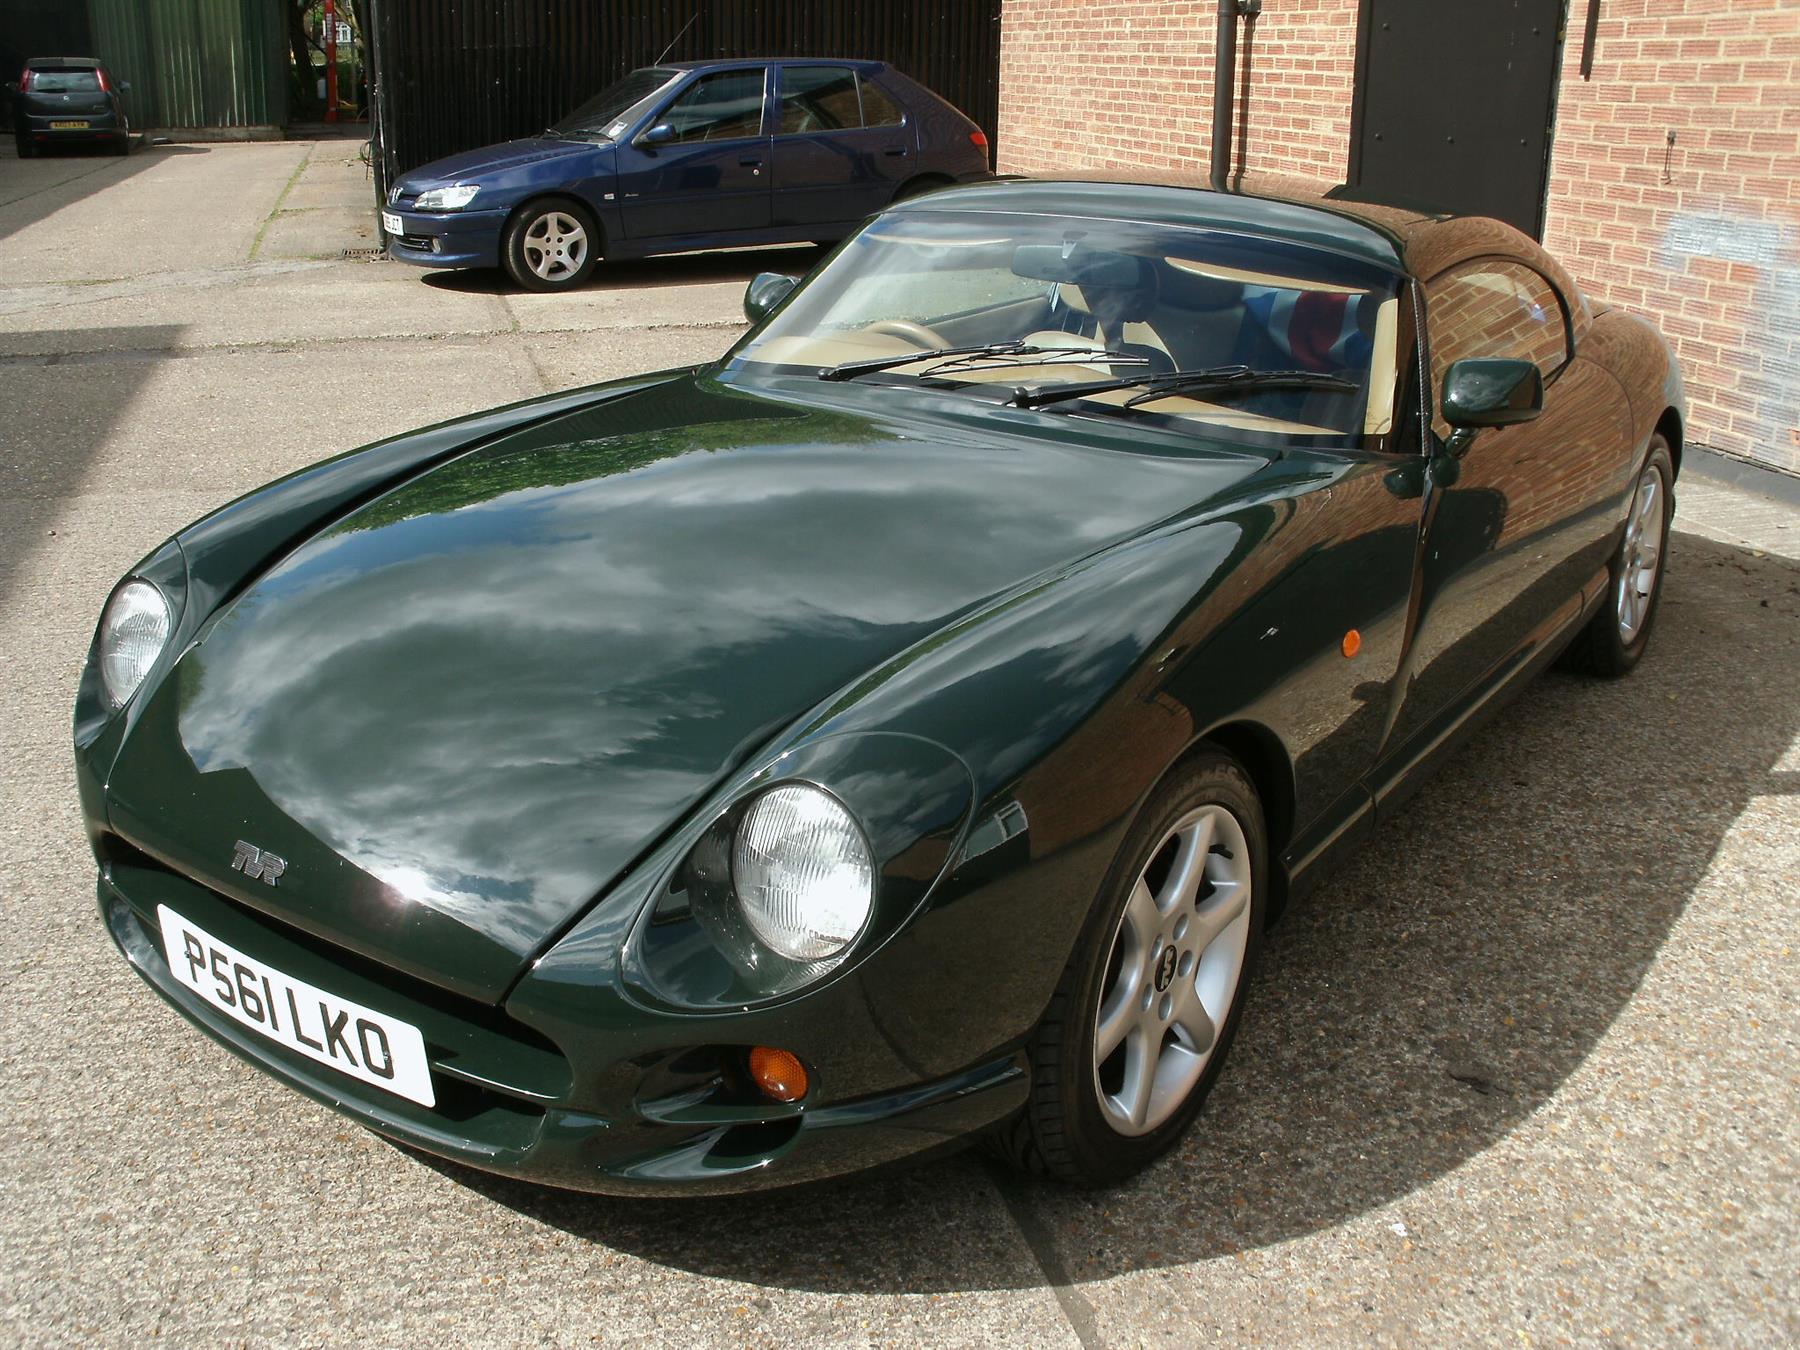 Used TVR Cerbera cars for sale with PistonHeads. 